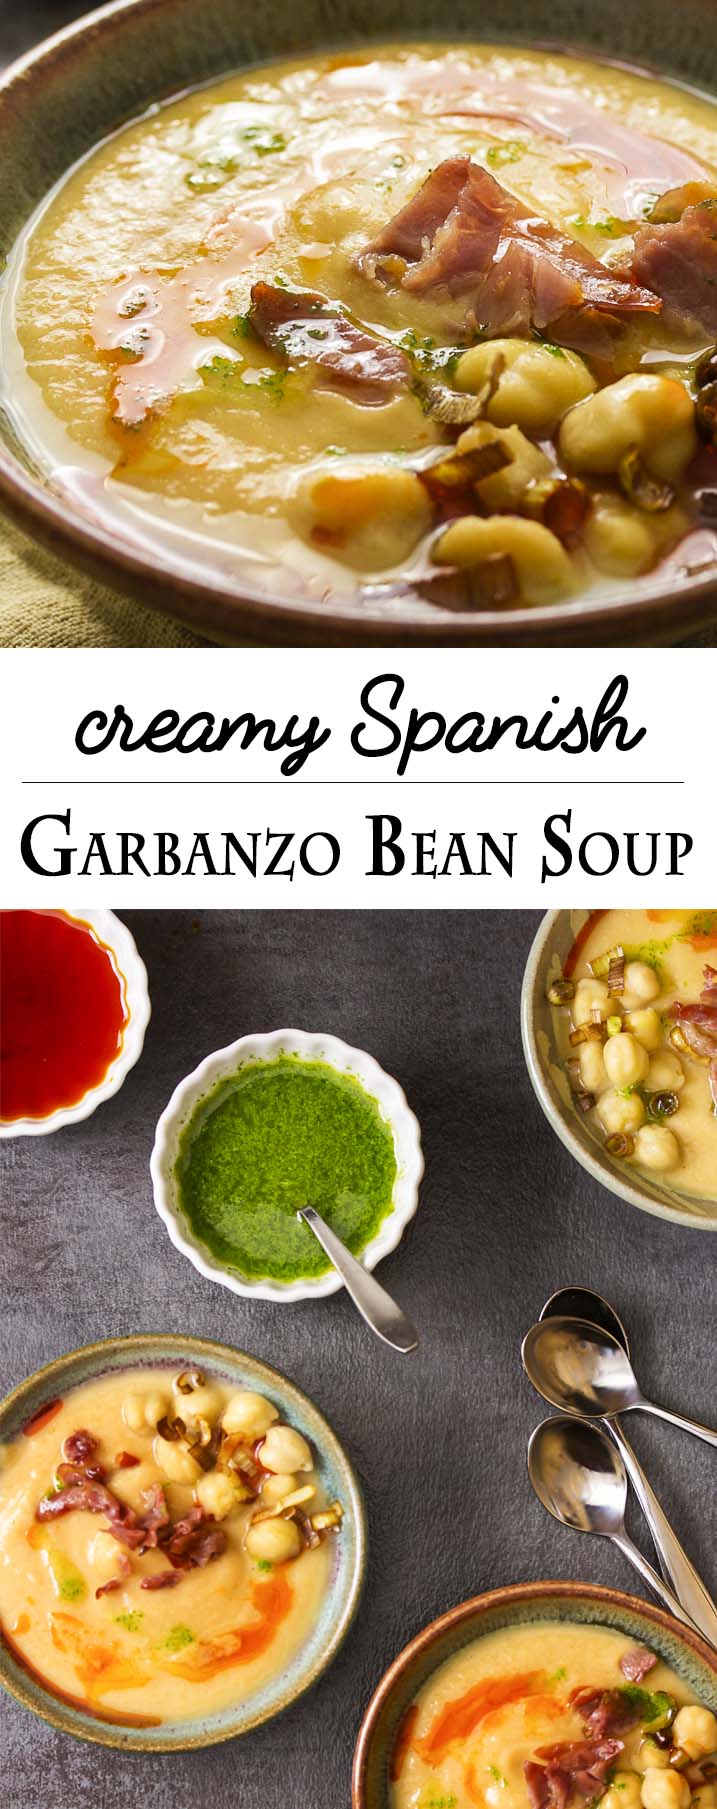 Looking for a simple and elegant soup? You'll love this Spanish garbanzo bean soup made from canned chickpeas and pureed until it's silky smooth. | justalittlebitofbacon.com